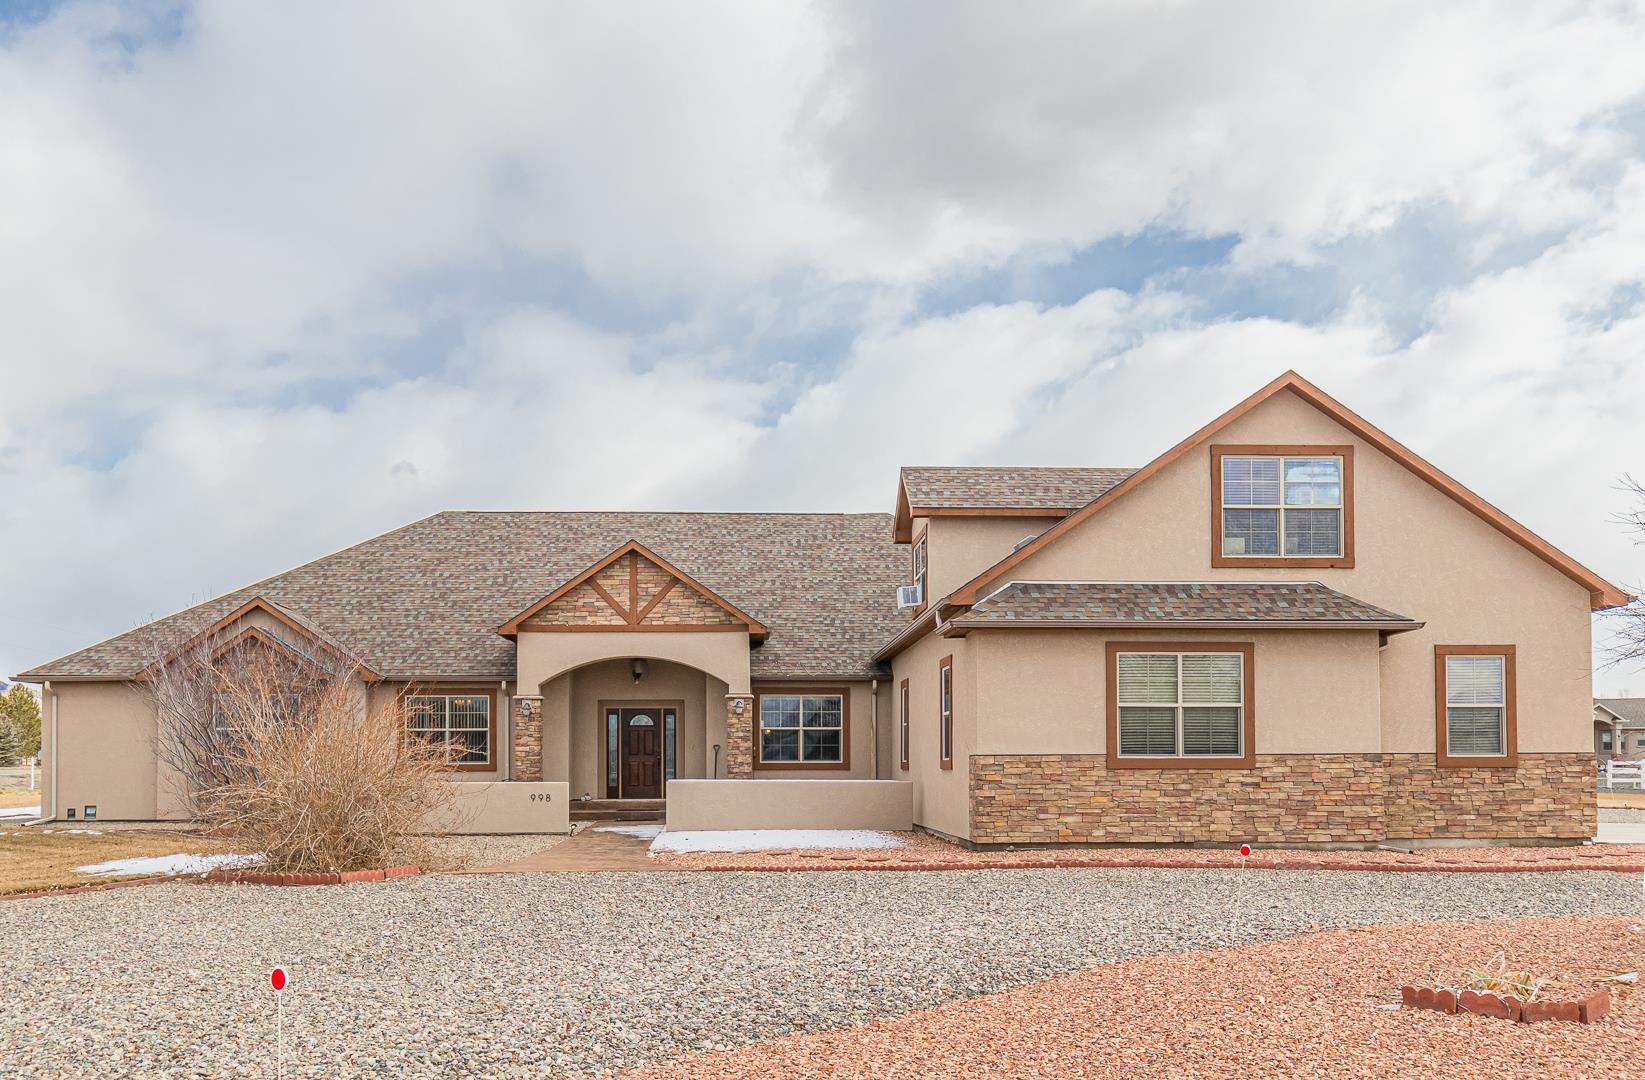 Welcome home! Take a closer look at this custom Colorado-style home! Are you looking for elbow room with room to grow combined with views? This home has it all and more! This 2009 Parade home sits proudly on a 3.02-acre, corner lot located in the Crown Point subdivision in North Grand Junction! You will be greeted with a park-like courtyard, lush lawn and even your own pumpkin patch!   The dramatic archway leads you into the grand foyer where you are invited with warmth and light! The formal dining is sure to impress.  The custom Brazilian walnut with rosewood accent hardwood looks as if it were placed just yesterday!  The gourmet kitchen boasts granite countertops, Custom Knotty Alder Cabinets and Pine Doors complete with roll outs and double ovens and beautiful under cabinet lighting. The generous pantry has a built-in skylight.  Enjoy the sunrise from the eat-in kitchen area! The built in mudroom, utility room adjacent to the master suite also has a built-in skylight. This home was built with entertaining in mind whilst maintaining the split floor plan for privacy.  All of the bedrooms are on the main level each have full walk-in closets. The primary suite offers a complete 5 piece bath, with a custom built in coffee/breakfast bar complete with a refrigerator for beverages or medicines. Say hello to the added 613 sf above- garage bonus room complete with a half bath, could offer movie theater room, flex room, or separate living space. The second primary suite/ mother-in-law suite has a private entrance, with a full bath and walk-in closet. Oil rubbed bronze finishes throughout, picture frame mirrors in bathrooms. Relax in the family/living area and cozy up to the gas fireplace and walk through the double doors out to the 650sf fully enclosed porch, complete with stamped, colored concrete throughout and 2 ceiling fans!   This Energy-Star rated home has updated energy efficiency options. 2 hot water heaters (can switch to single) with instant hot water circulator. out. The 1200SF garage is sure to house your toys, storage and more! The property offers complete RV Parking, with electric hook up, RV Sewer dump. Please refer to the home feature list for full/additional details in listing information or call the listing agent 970-697-4074.  The pride of ownership shines through from every corner, top to bottom! Original owner, no pets have ever lived in or on the property. Please call to schedule your private tour today!